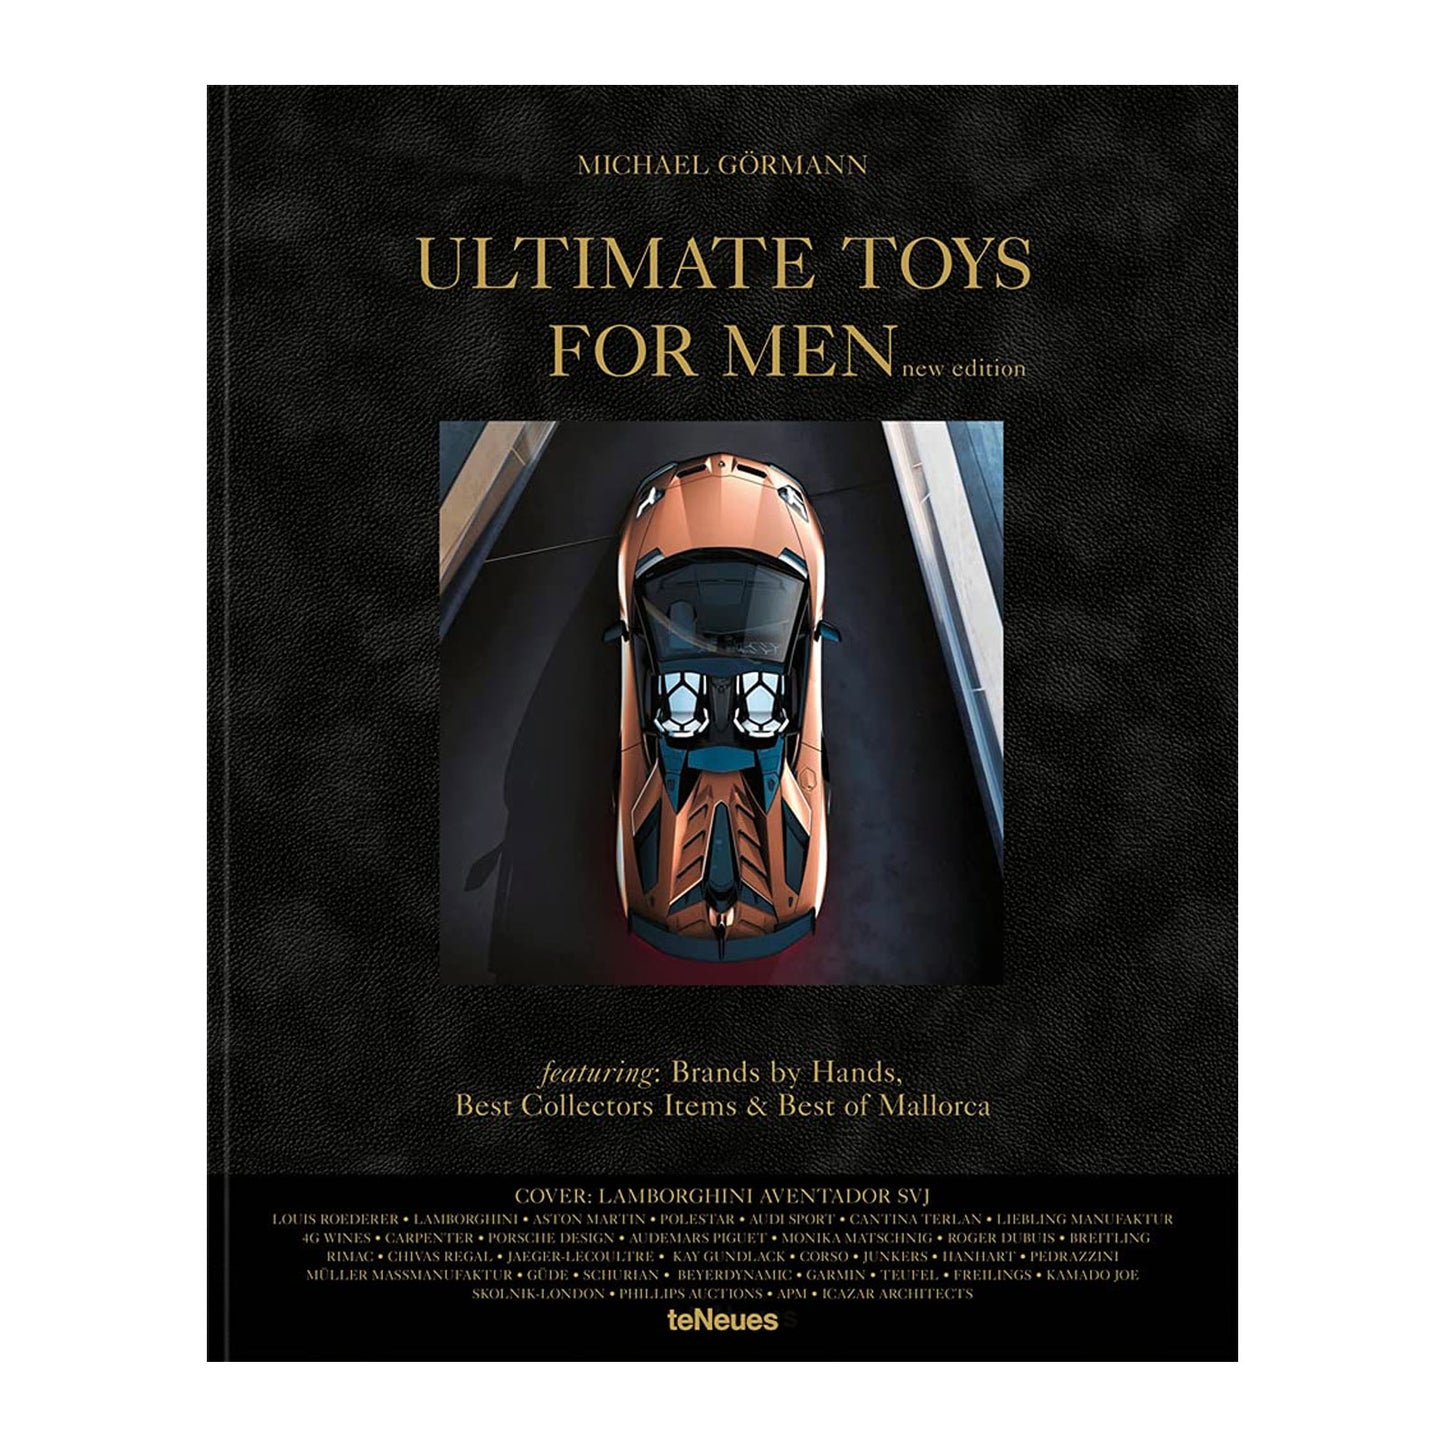 Ultimate Toys for Men (New Edition)